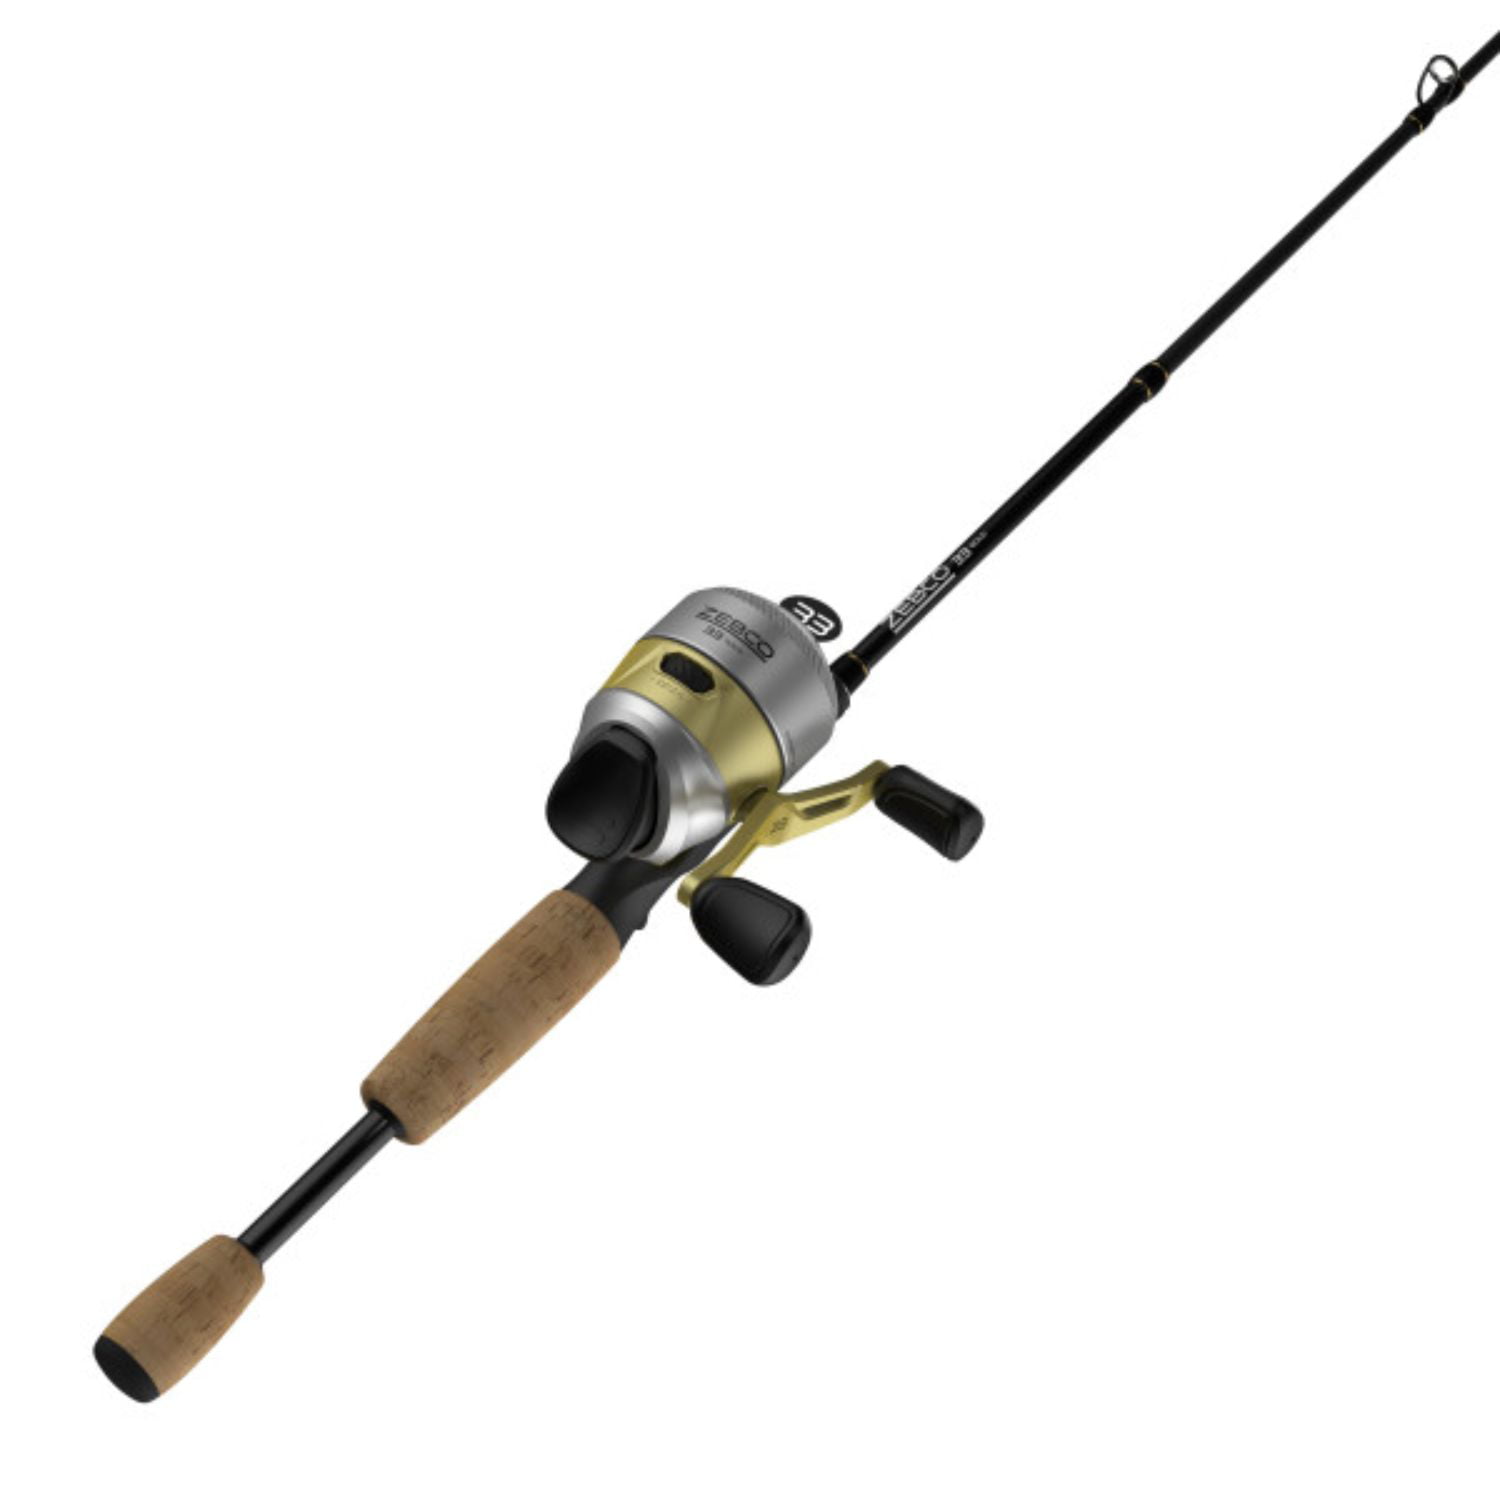 Durable Fiberglass Rod with ComfortGrip Handle All-Metal Gears Zebco Roam Spinning Reel and 2-Piece Fishing Rod Combo Instant Anti-Reverse Fishing Reel